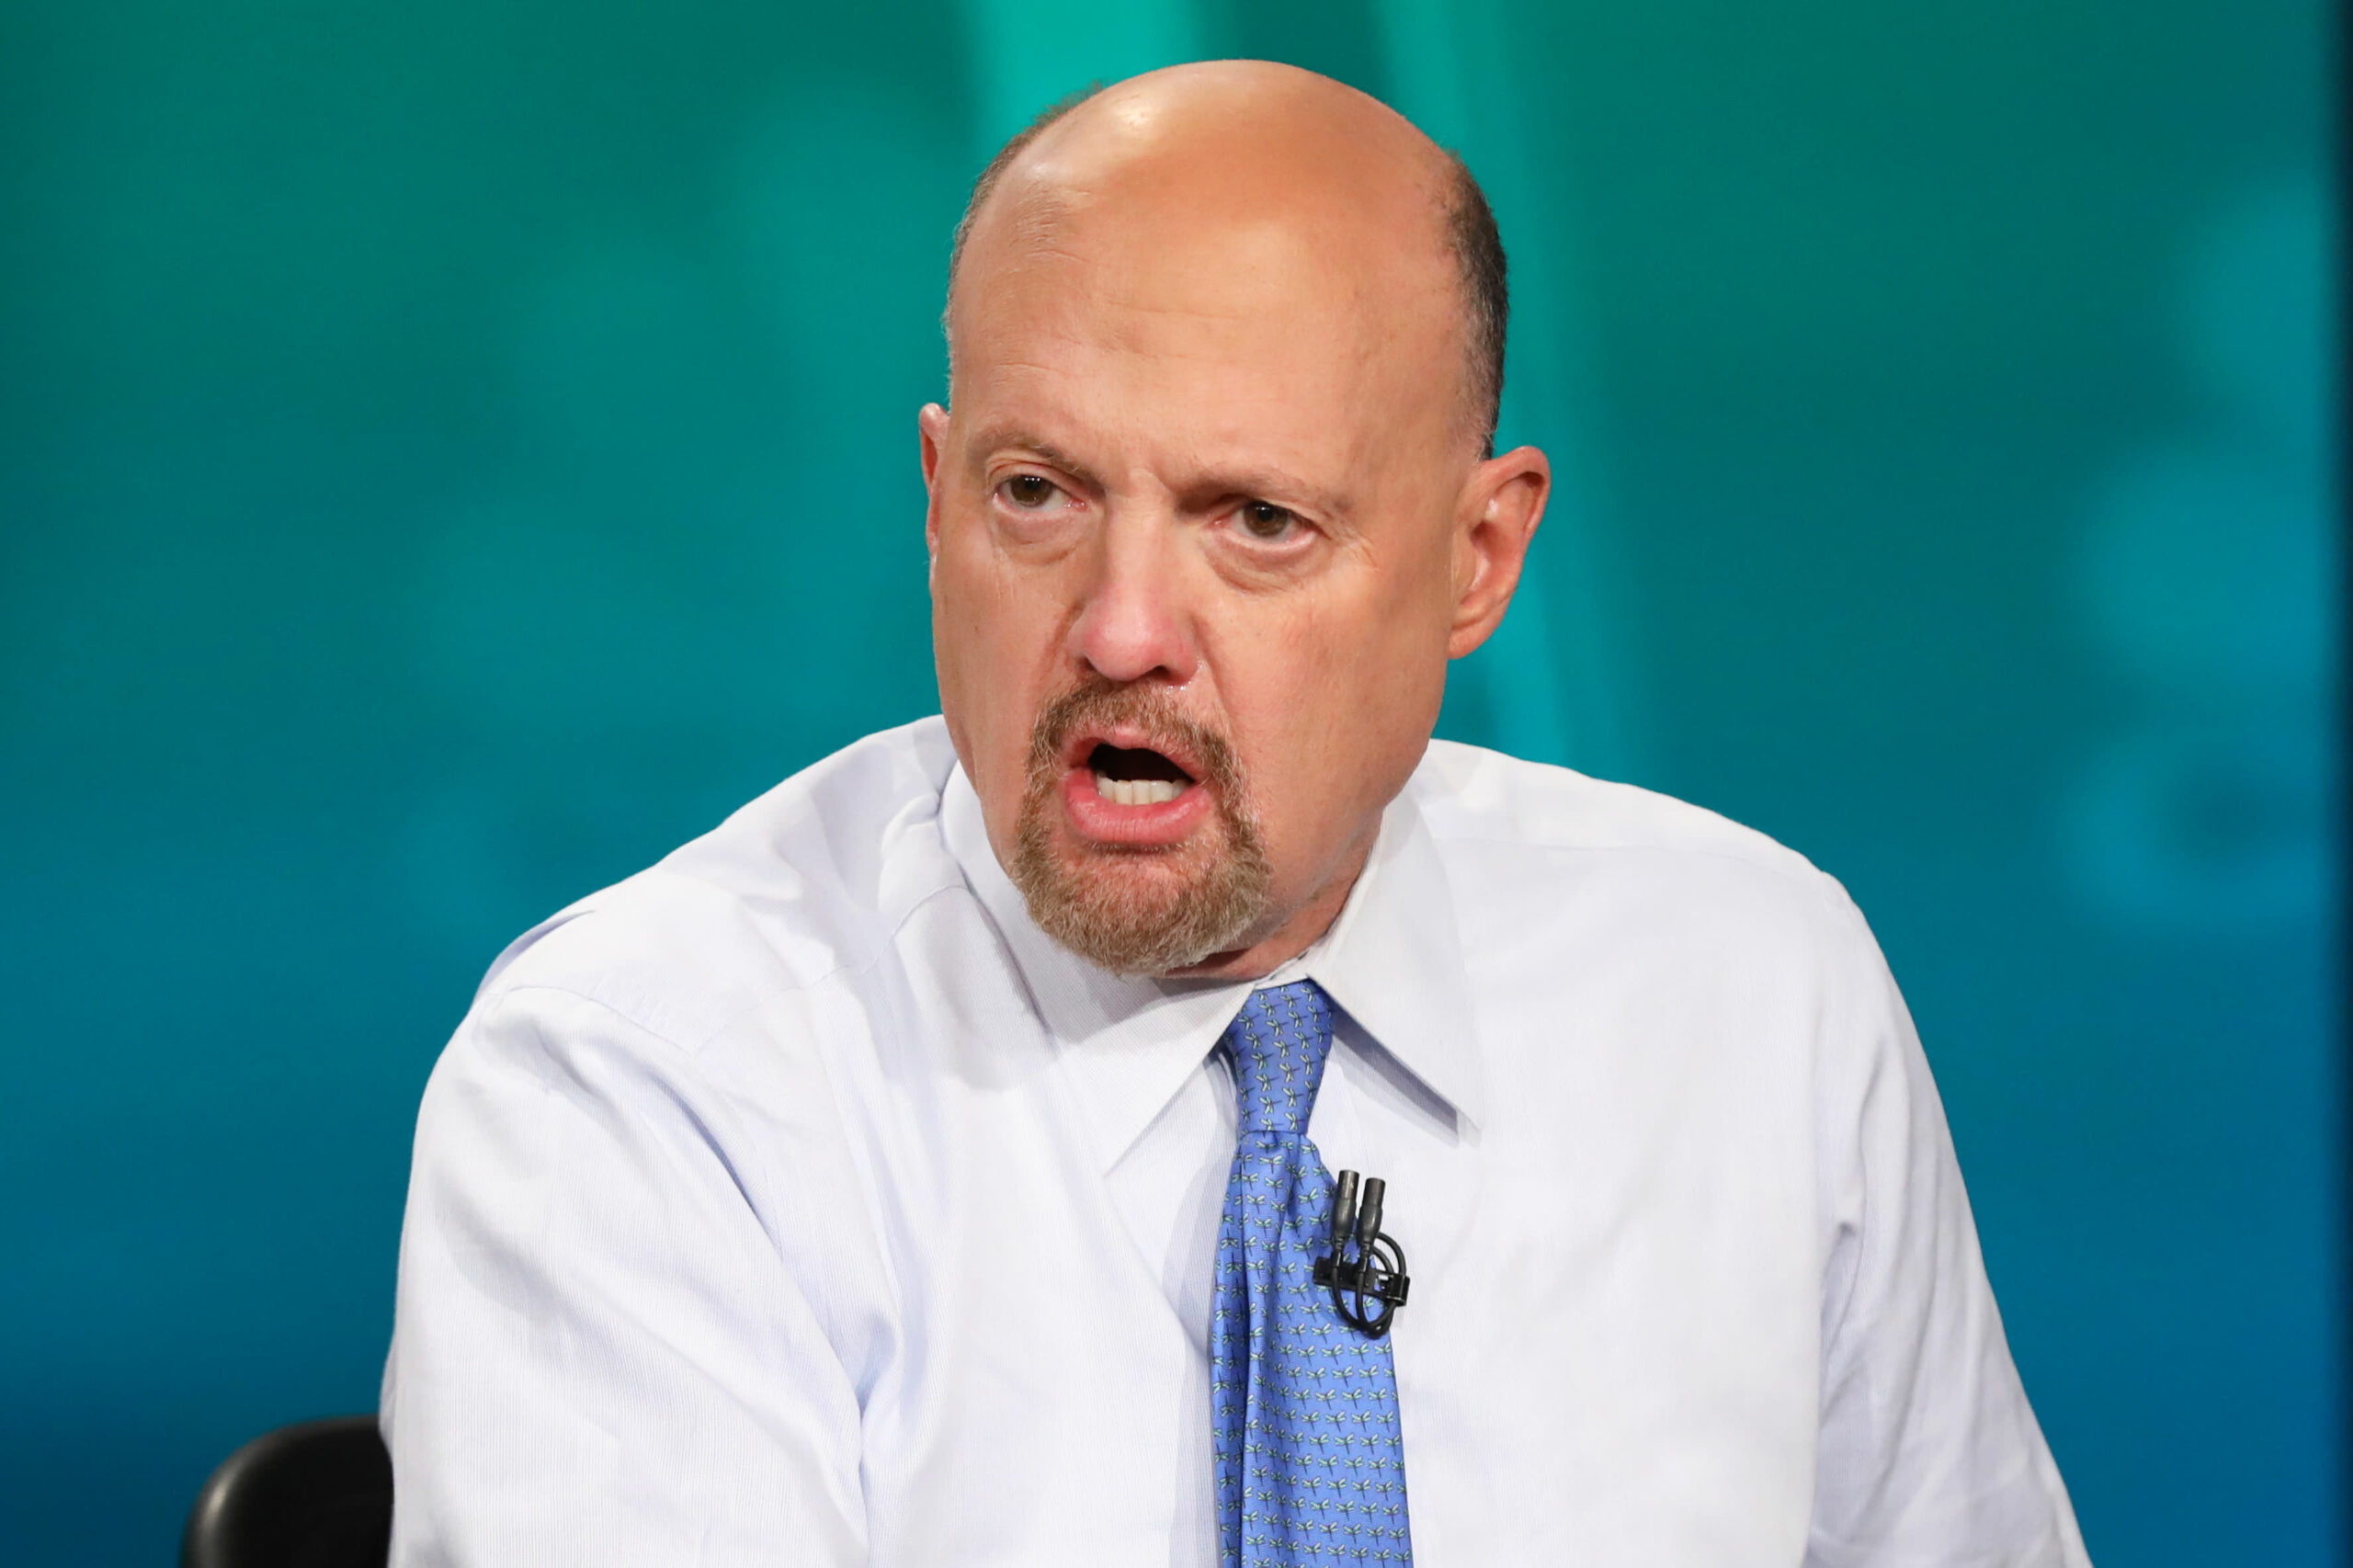 ‘I have Covid,’ Jim Cramer says. He says he’s been triple vaccinated and has a mild case